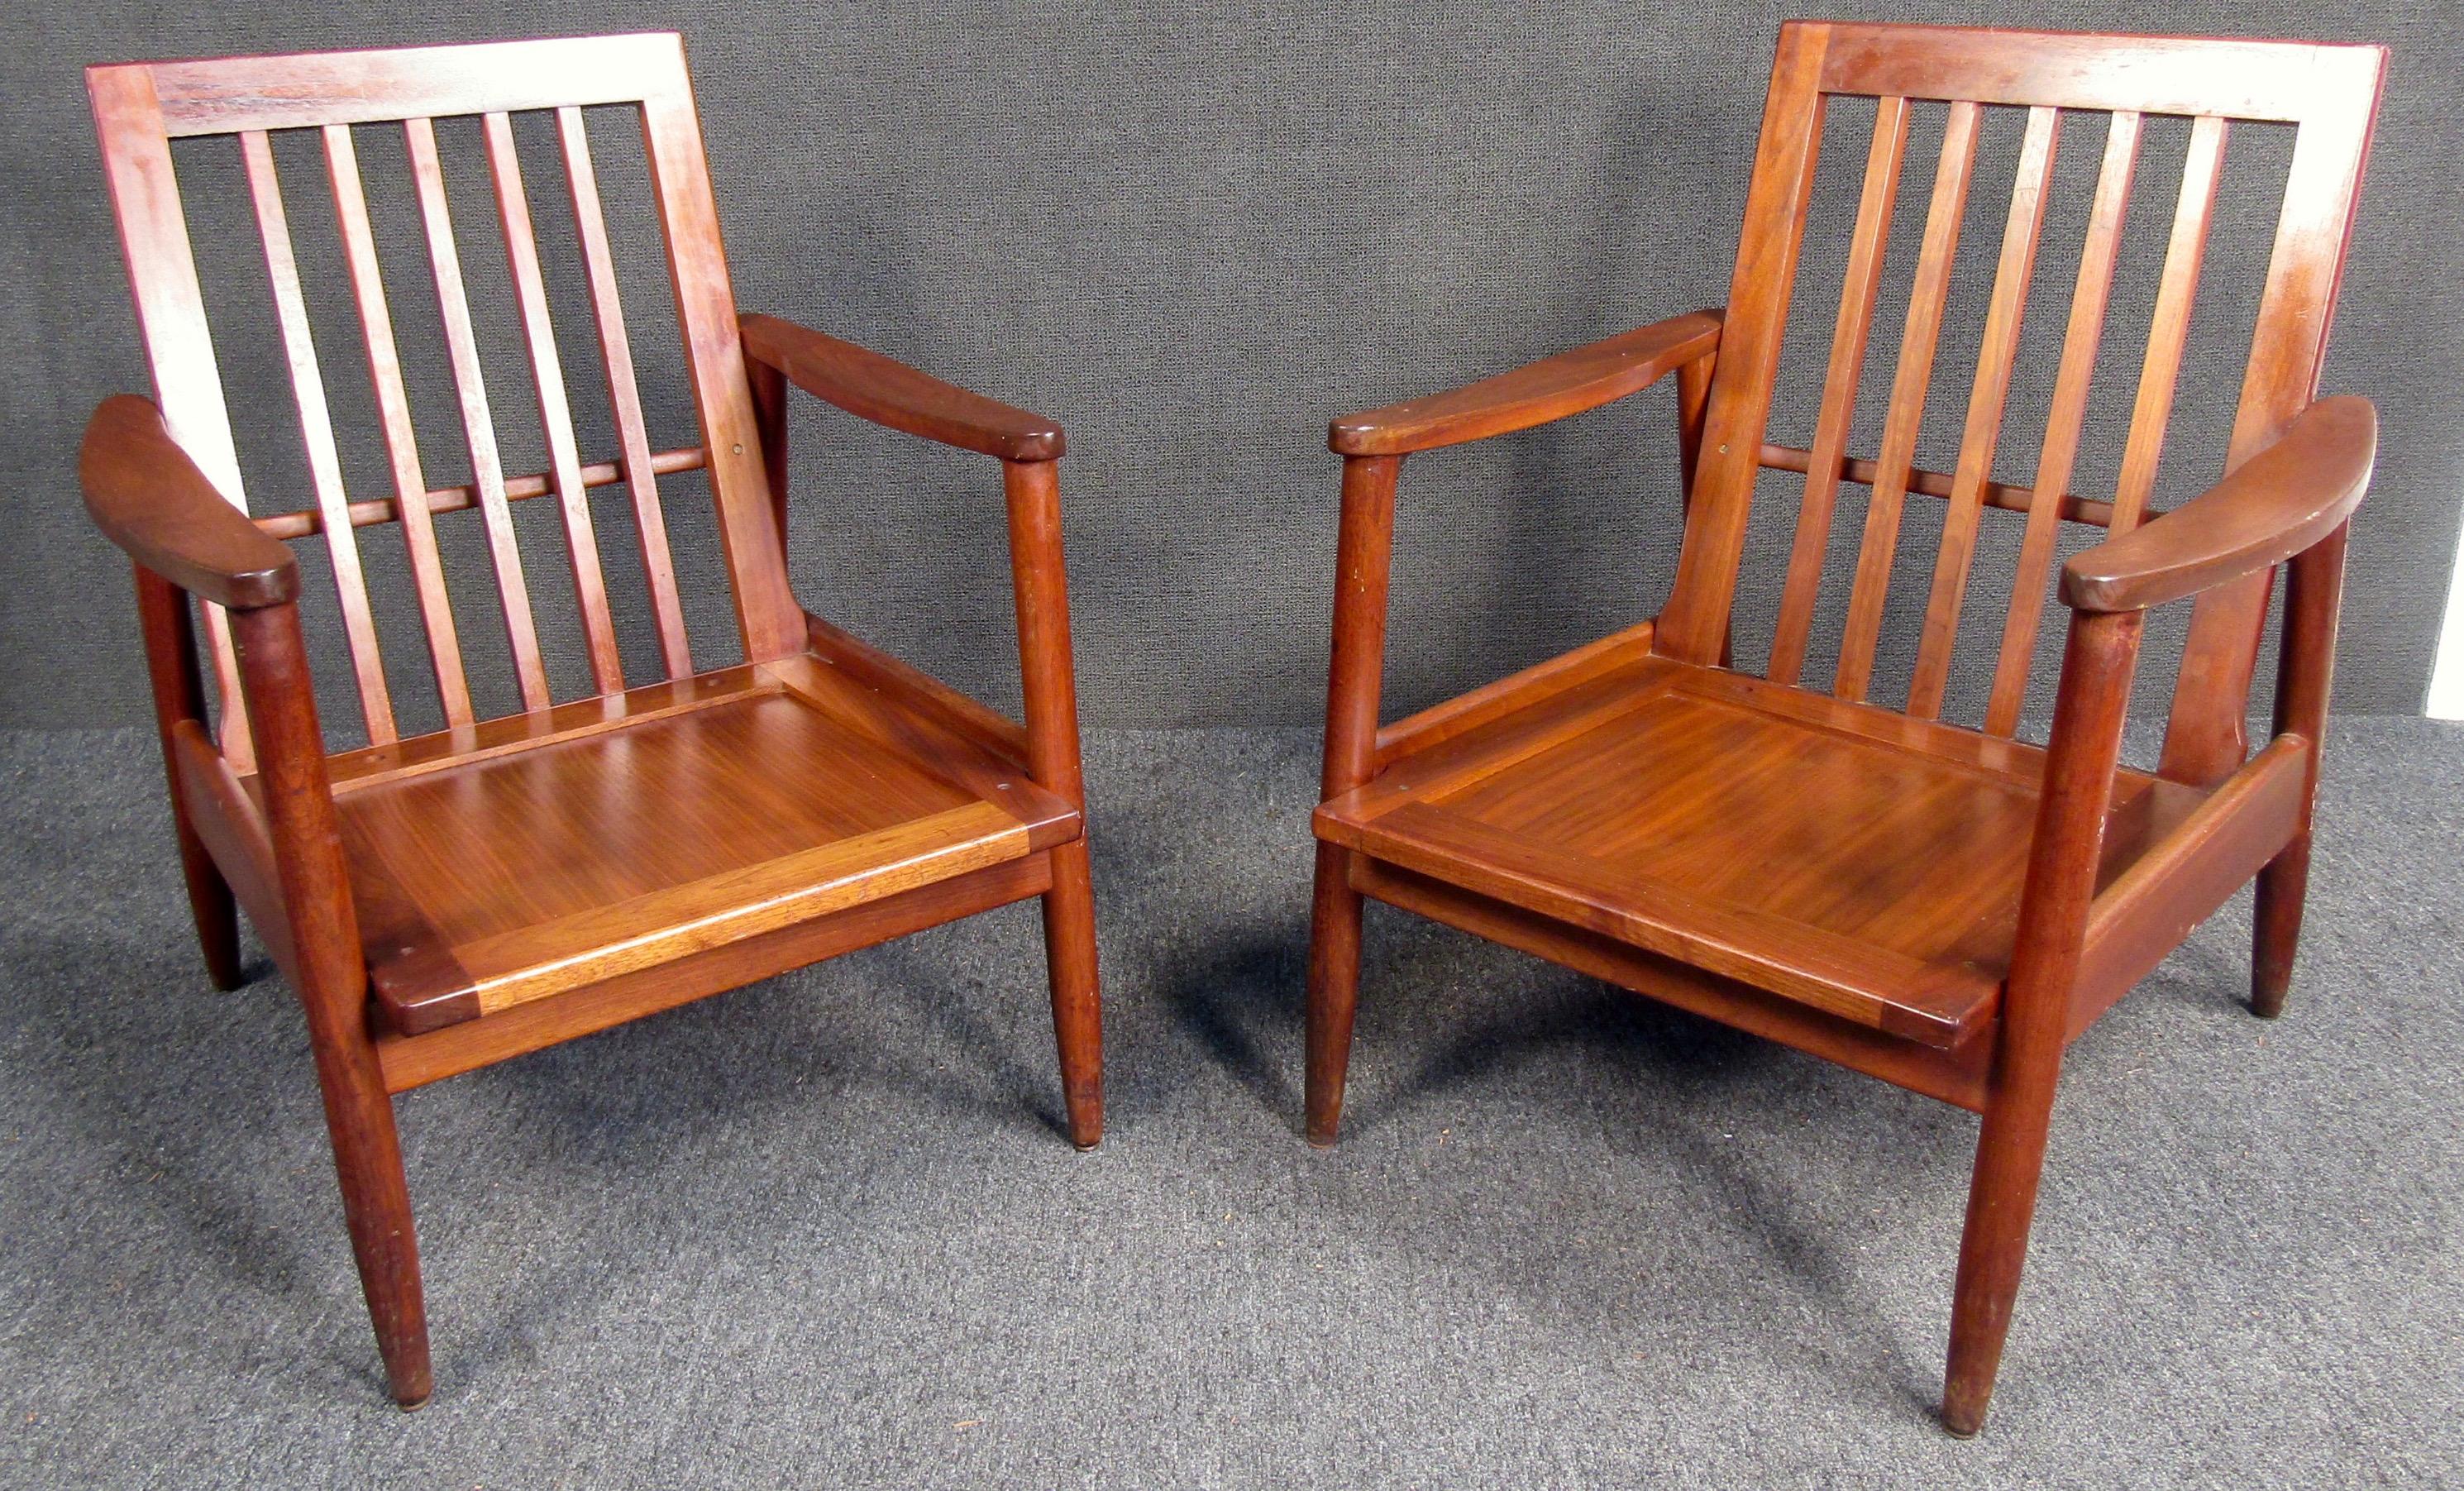 Stunning pair of Mid-Century Modern walnut chairs. Featuring rich walnut grain and a backrest set on a low-rise wooden frame with a light finish, the understated style and clean lines of this accent chair update your space with modern appeal.